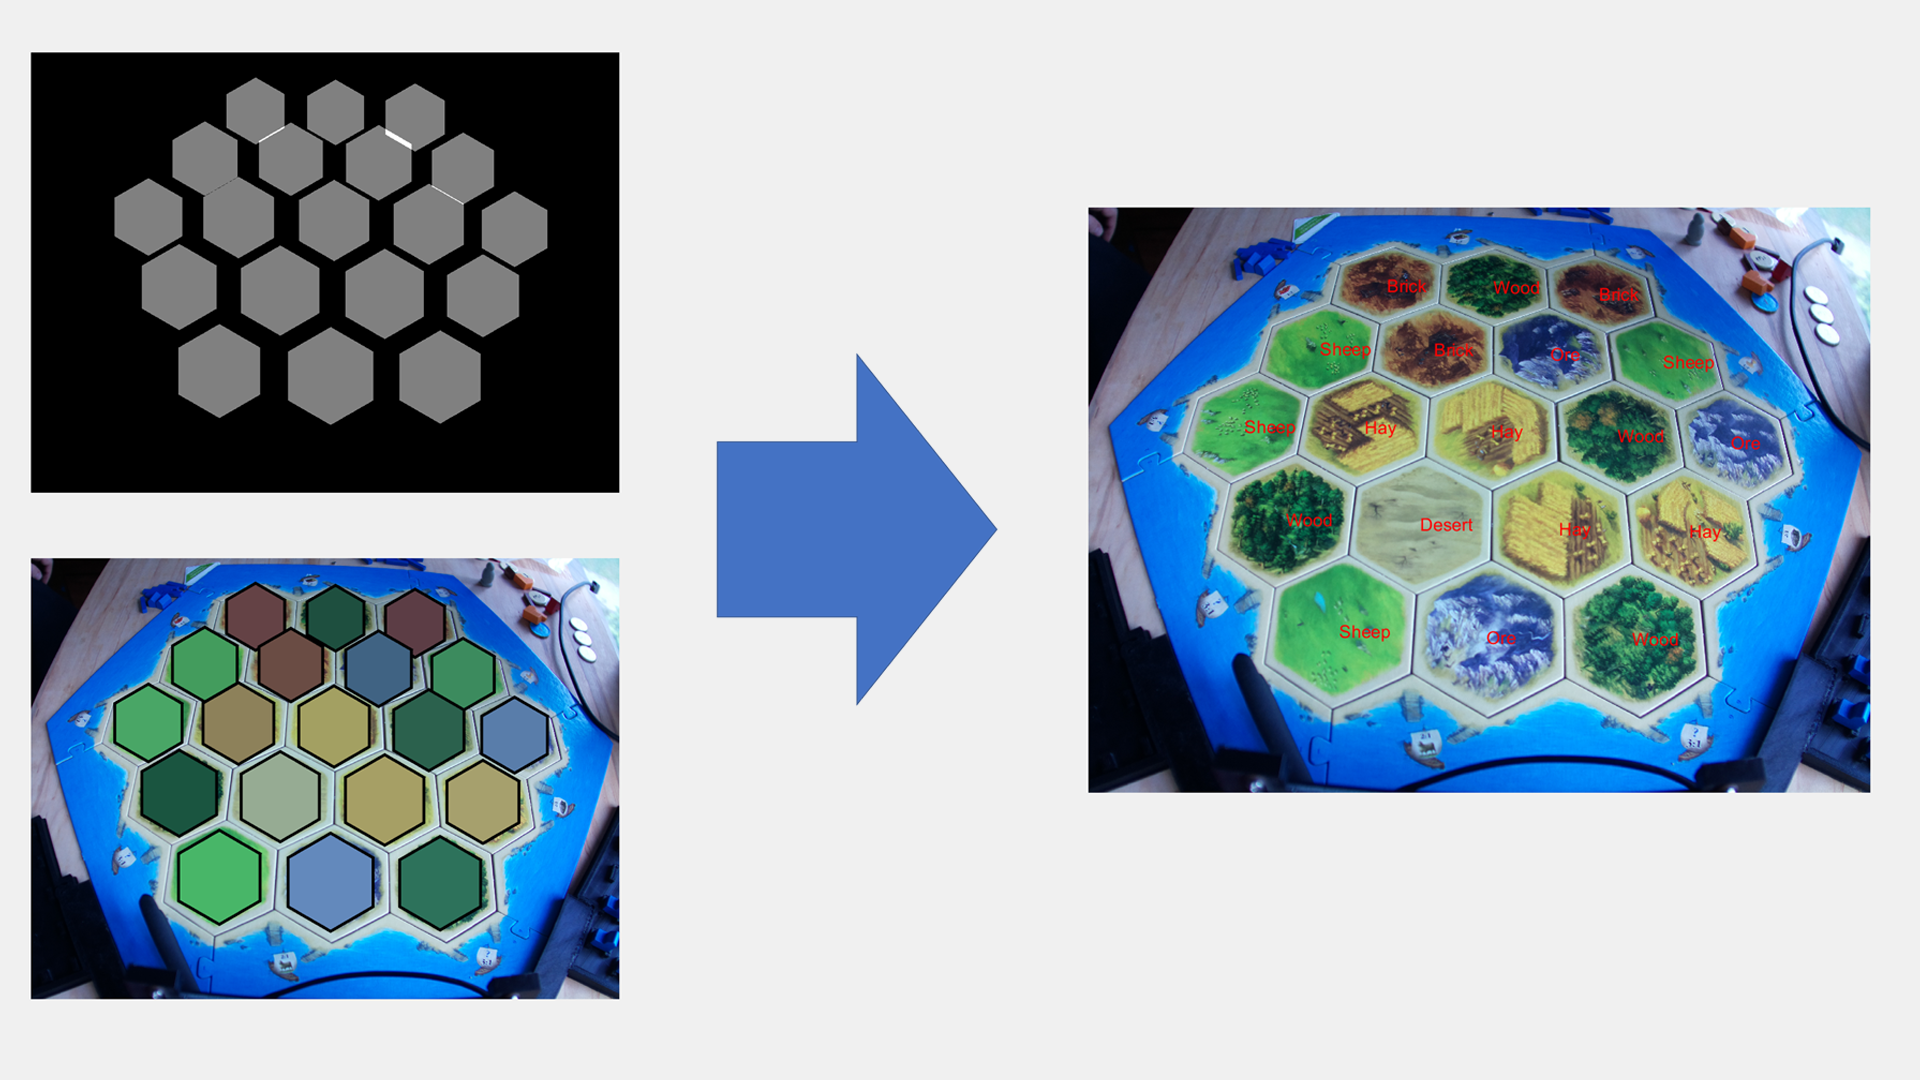 An image of the mapping tool used to create the Catan robot.